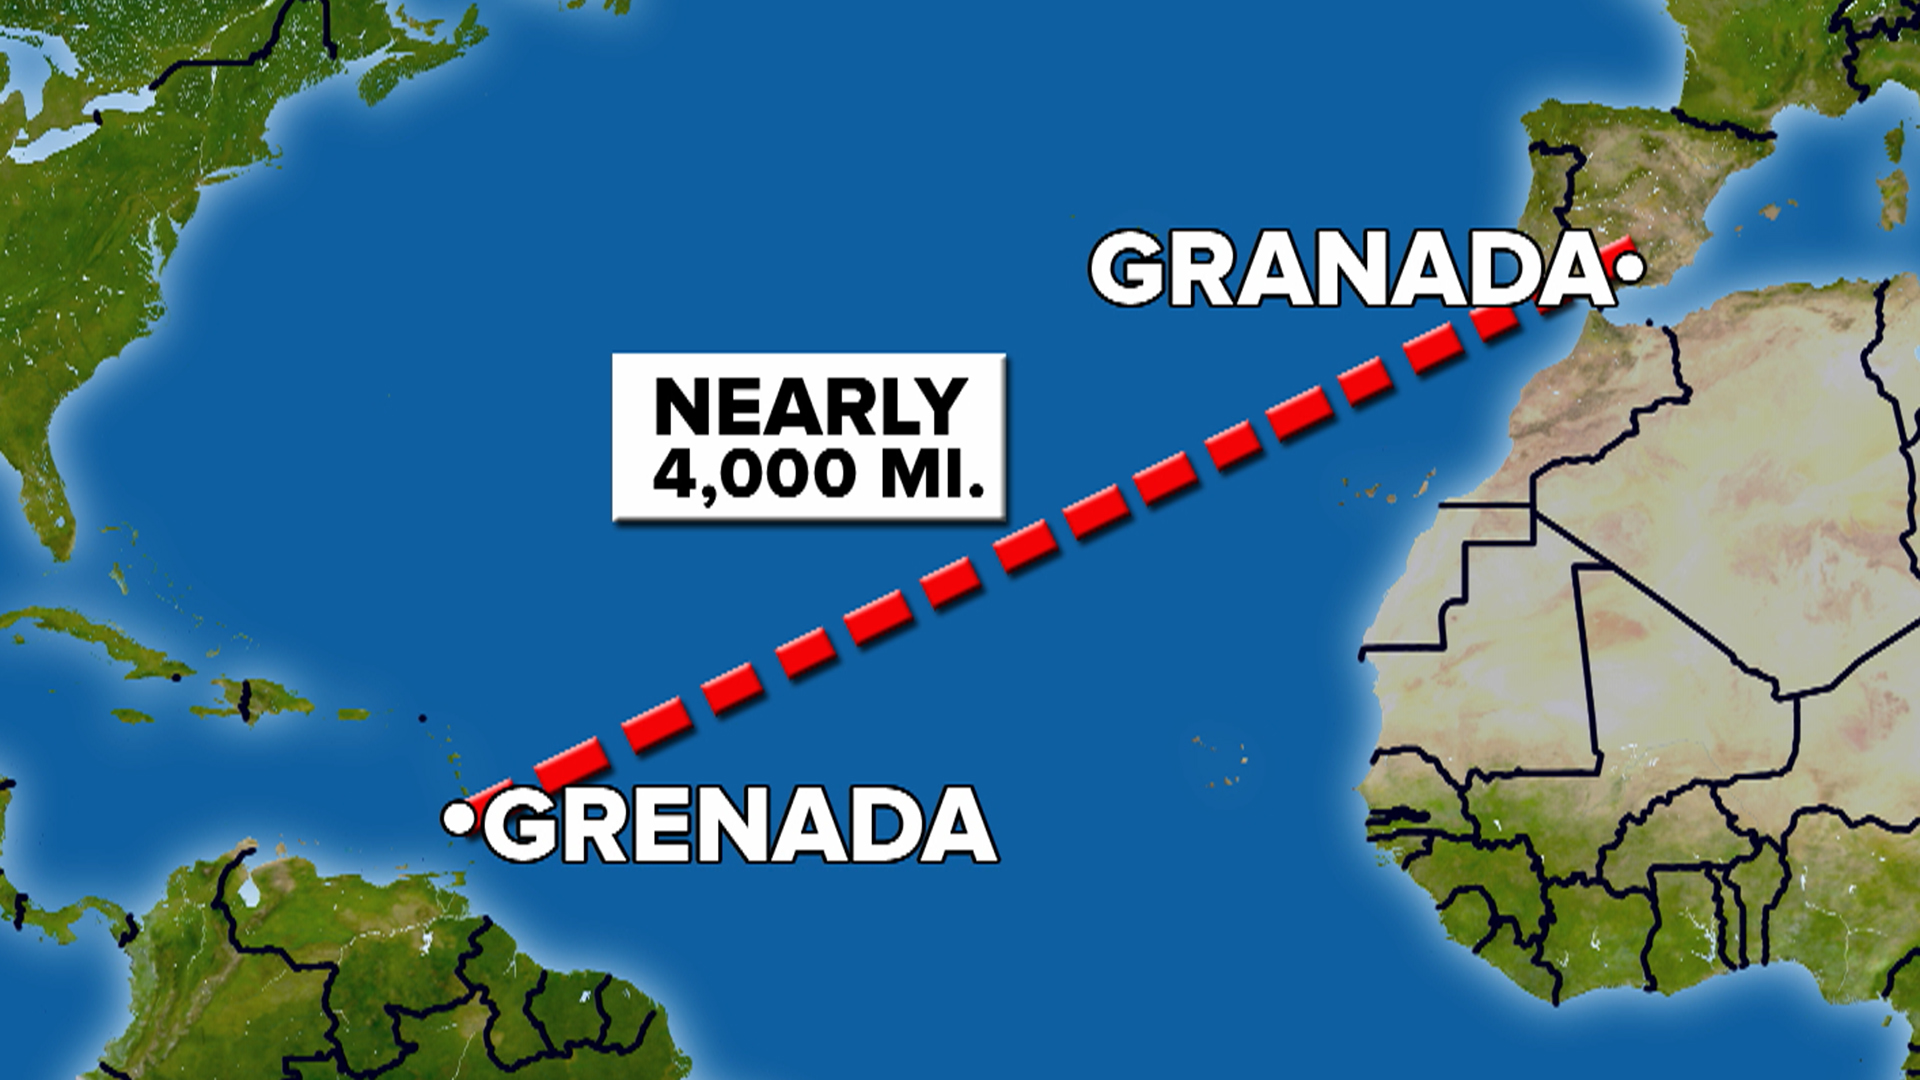 Man Sues Airline After Landing in Grenada Rather Than Granada